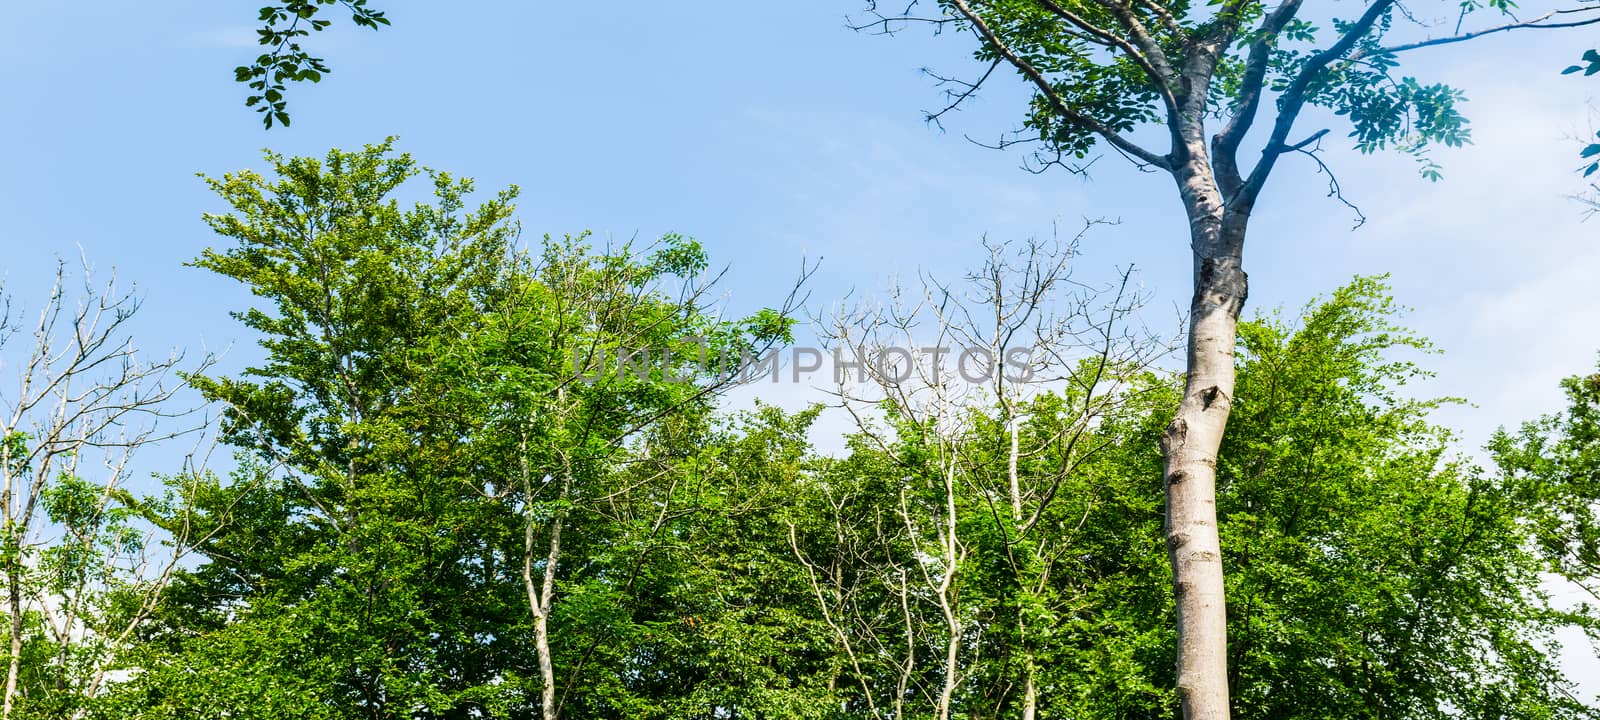 Panorama of tops of trees in forest against blue sky with clouds background by paddythegolfer